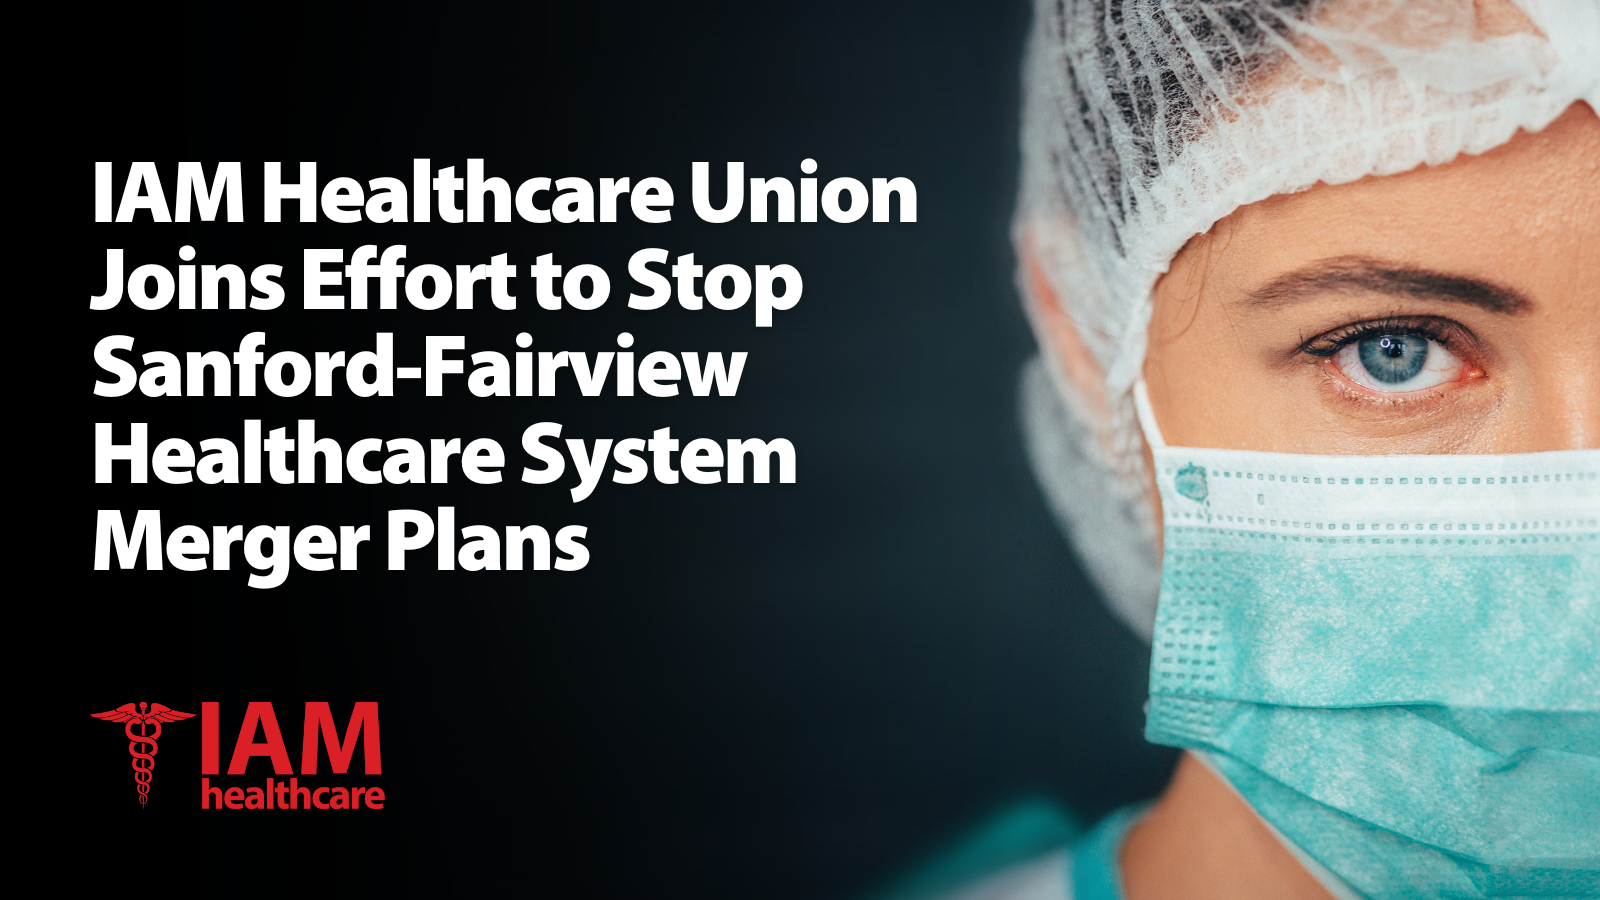 IAM Healthcare Union Joins Effort to Stop Sanford-Fairview Healthcare System Merger Plans